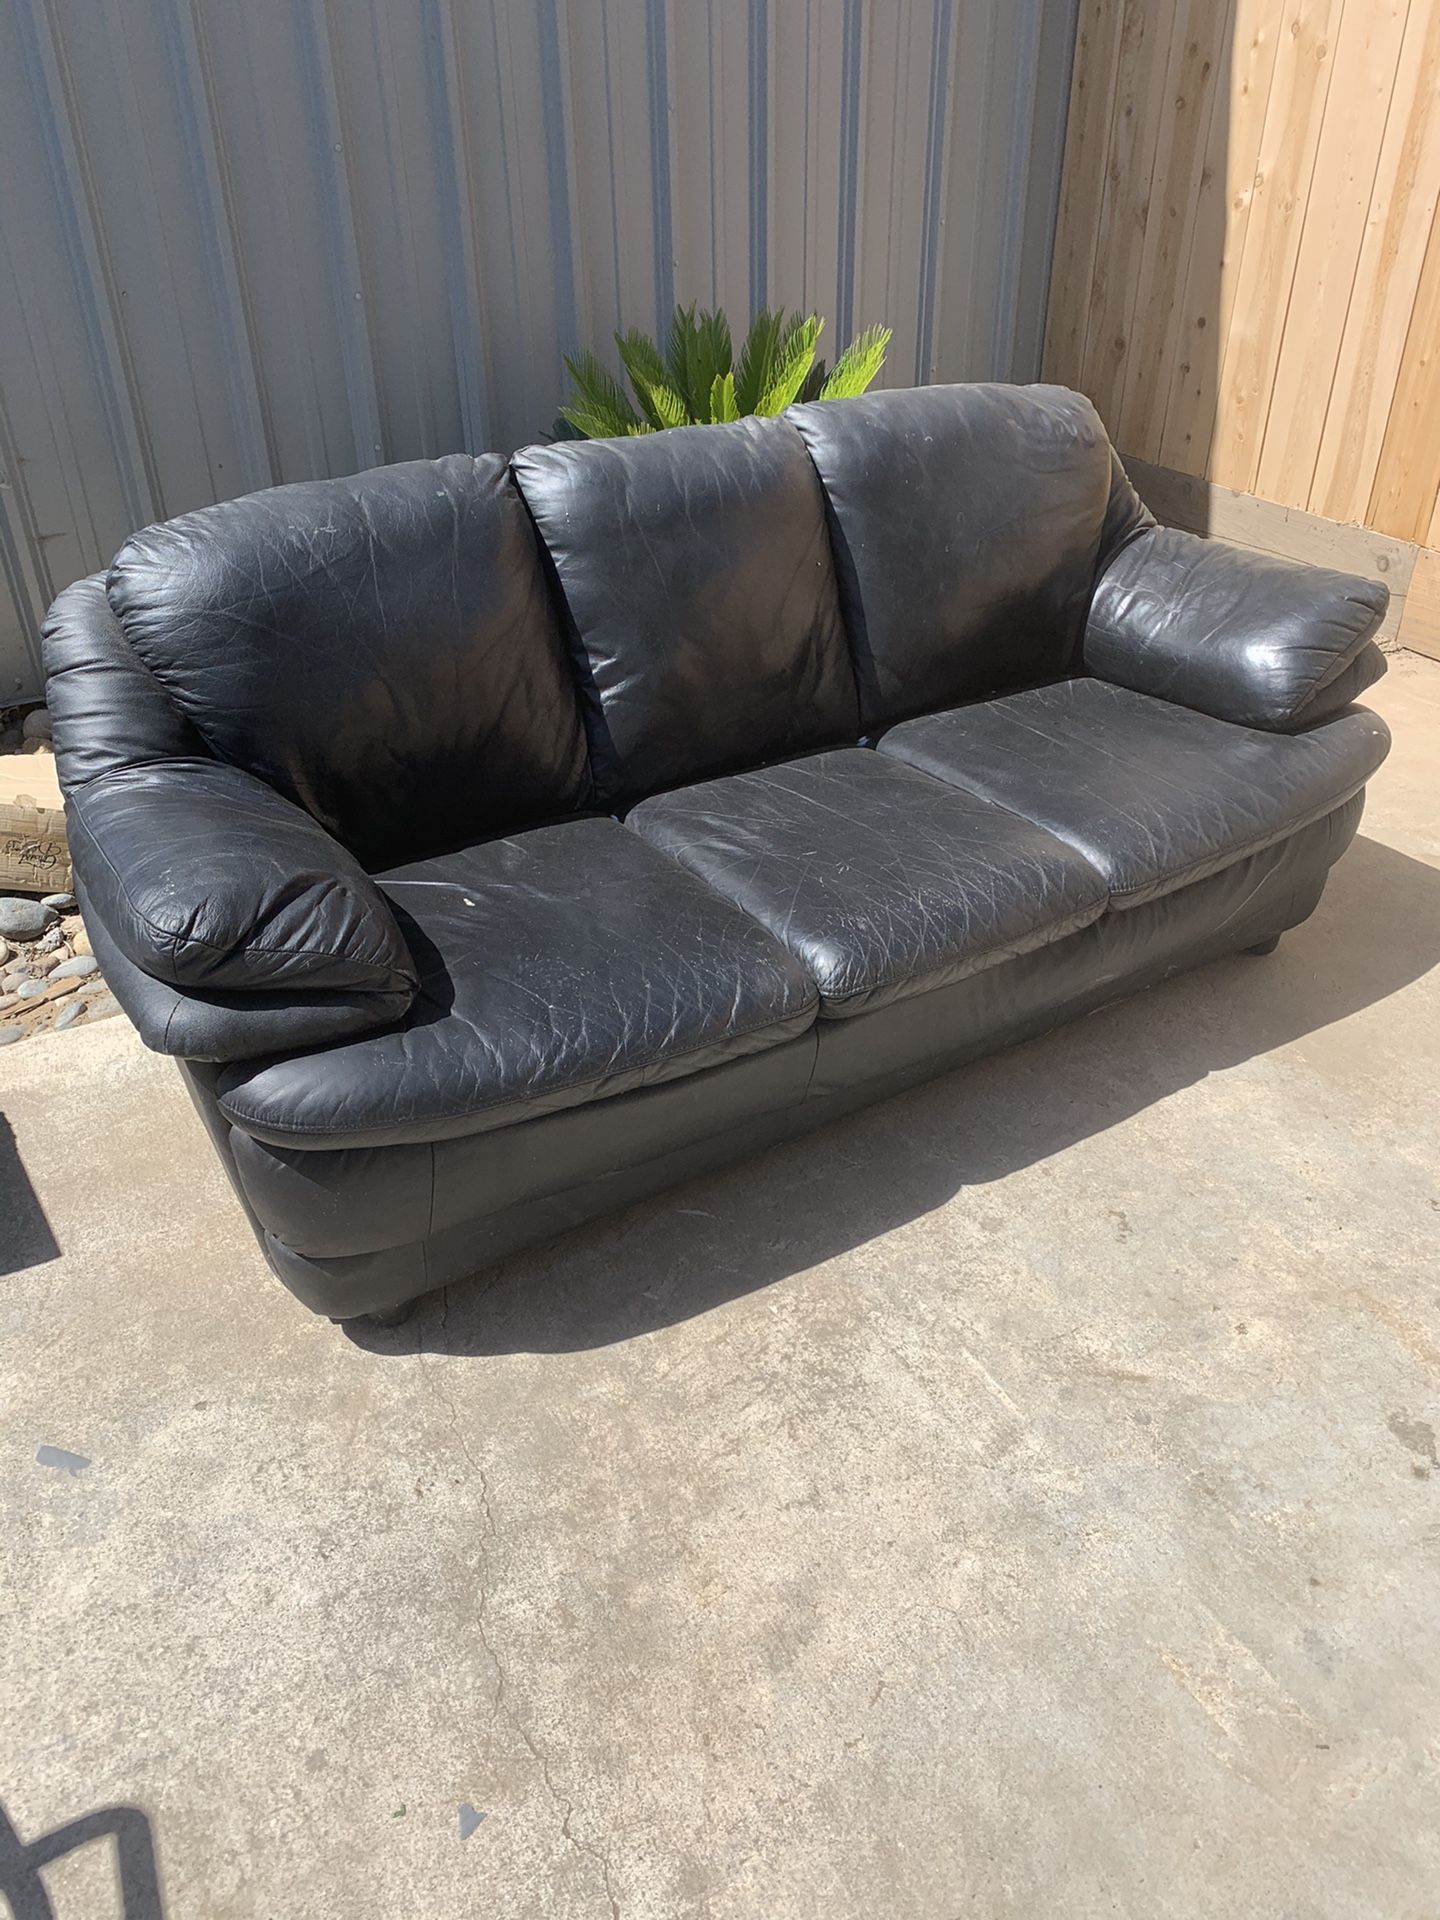 Used couch/ sofa chair black leather